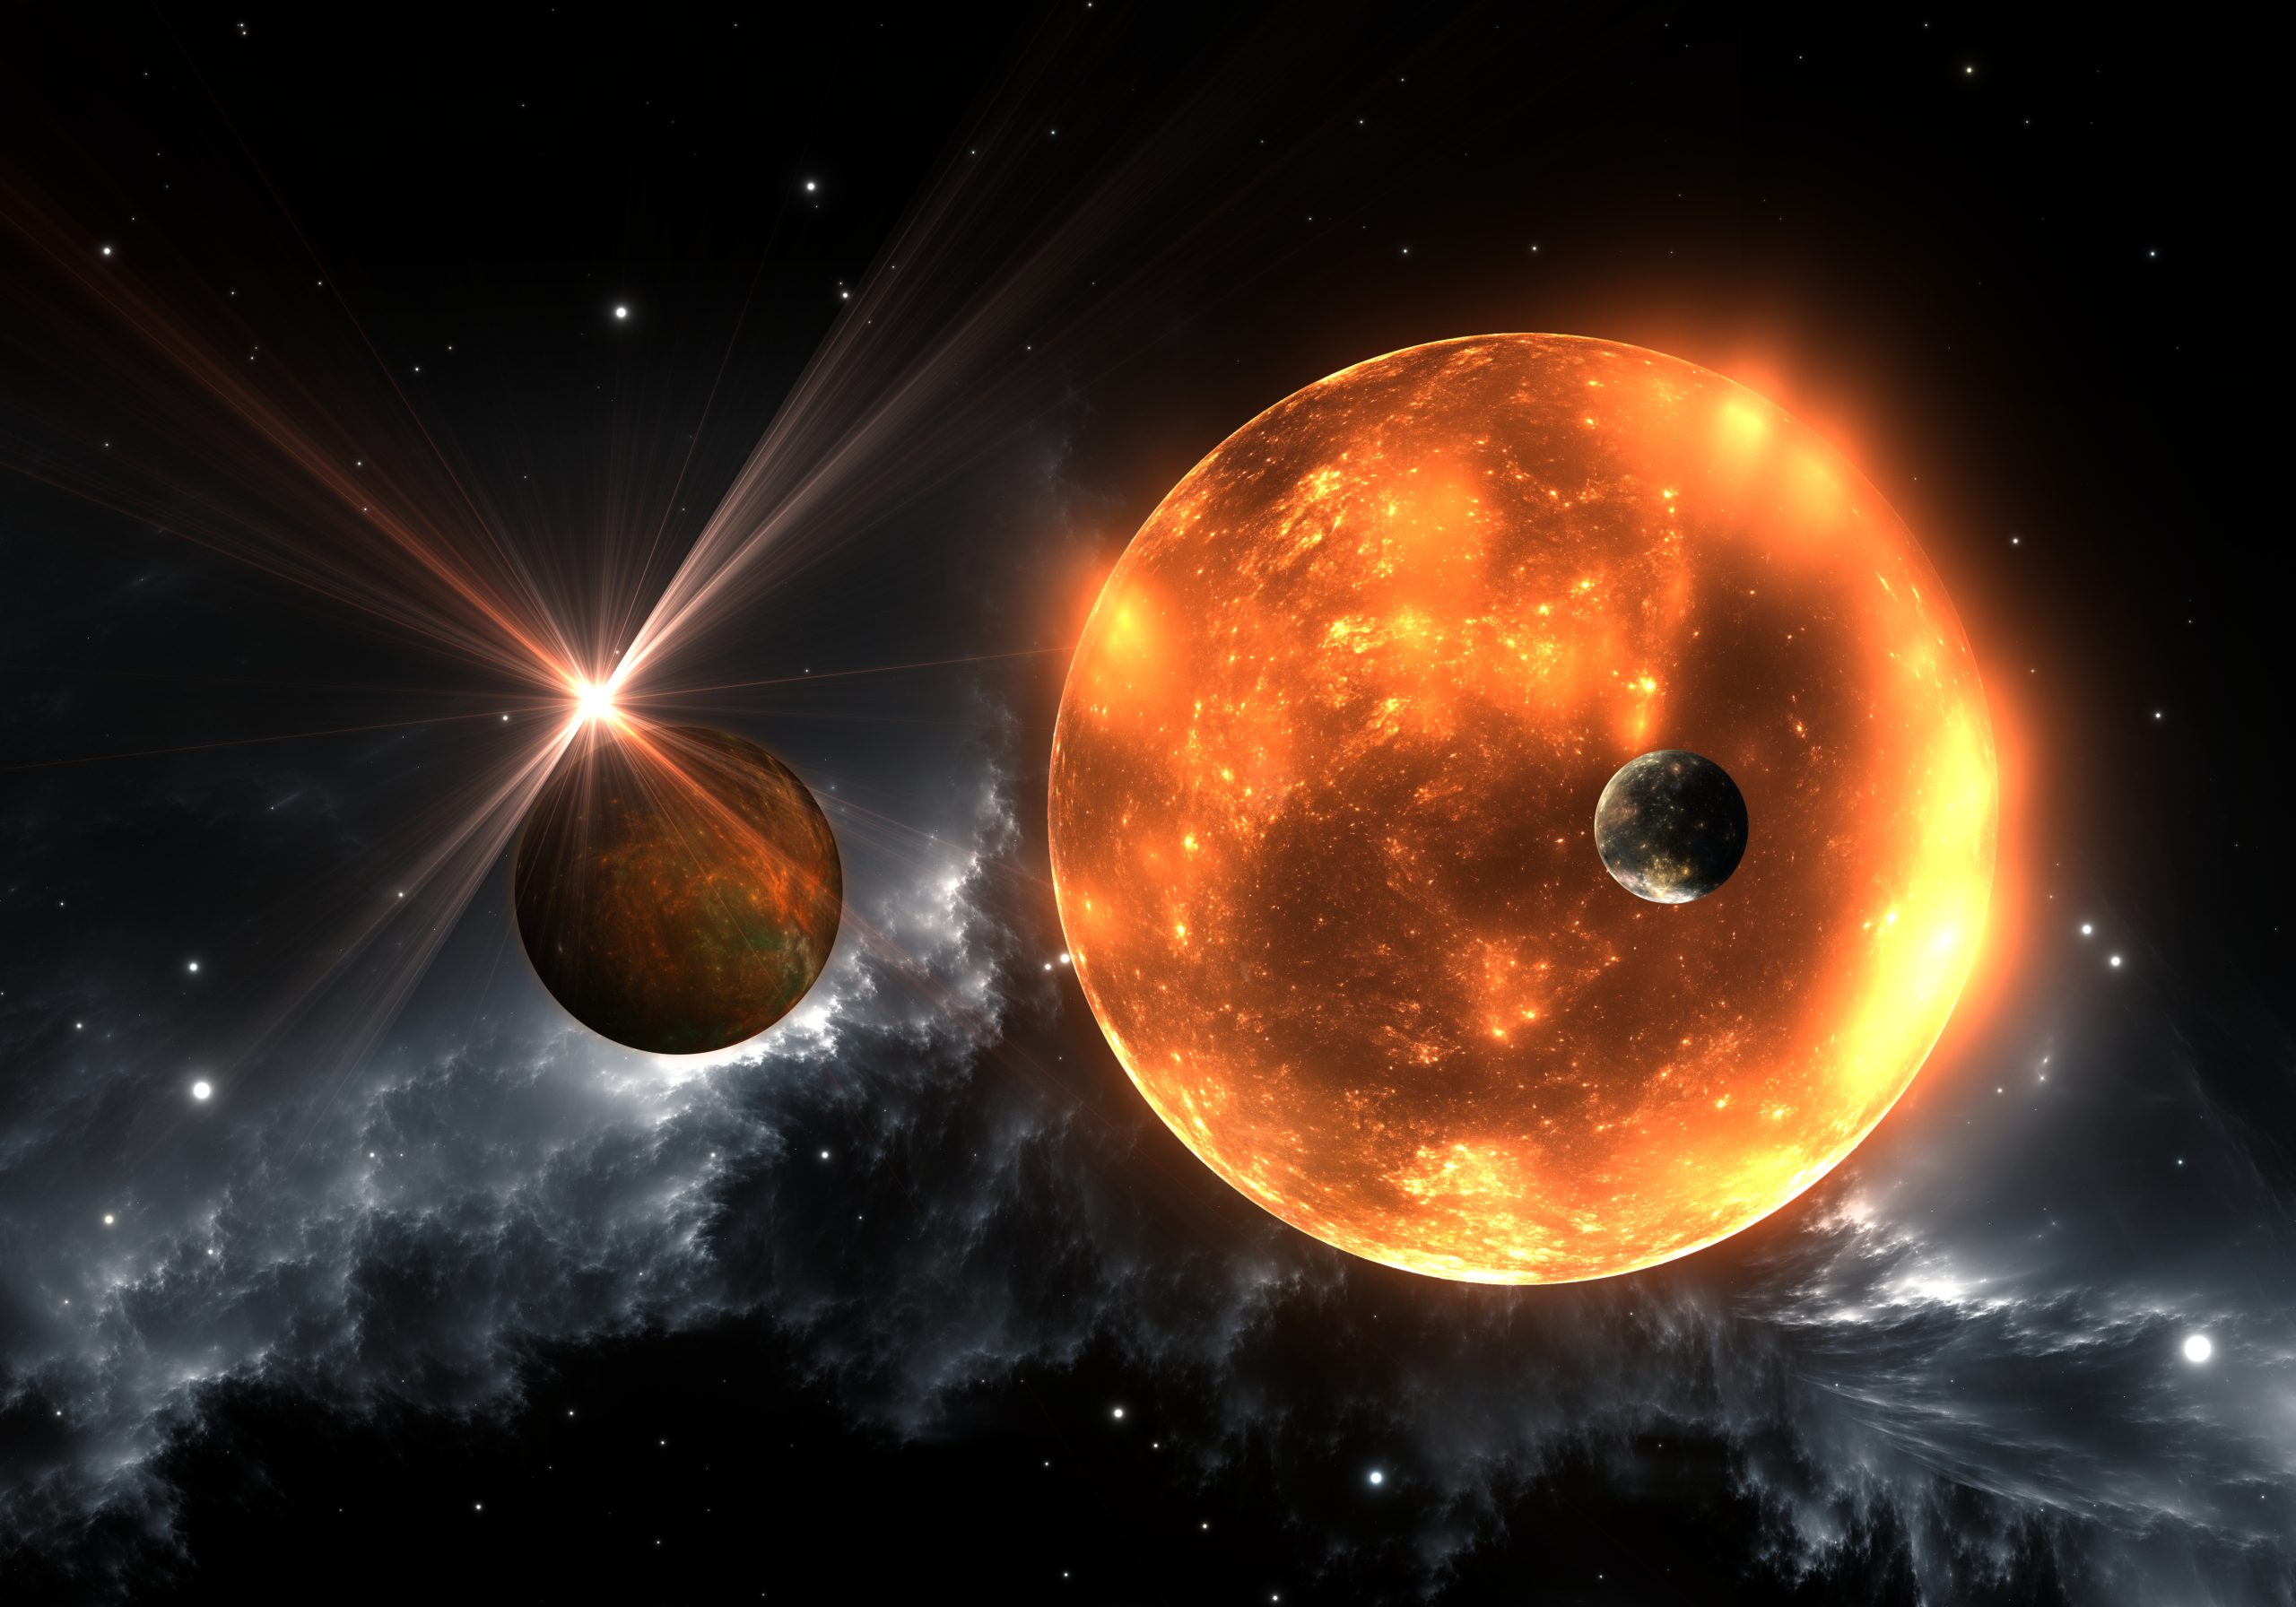 An artistic illustration showing a red dwarf and exoplanets. Depositphotos.